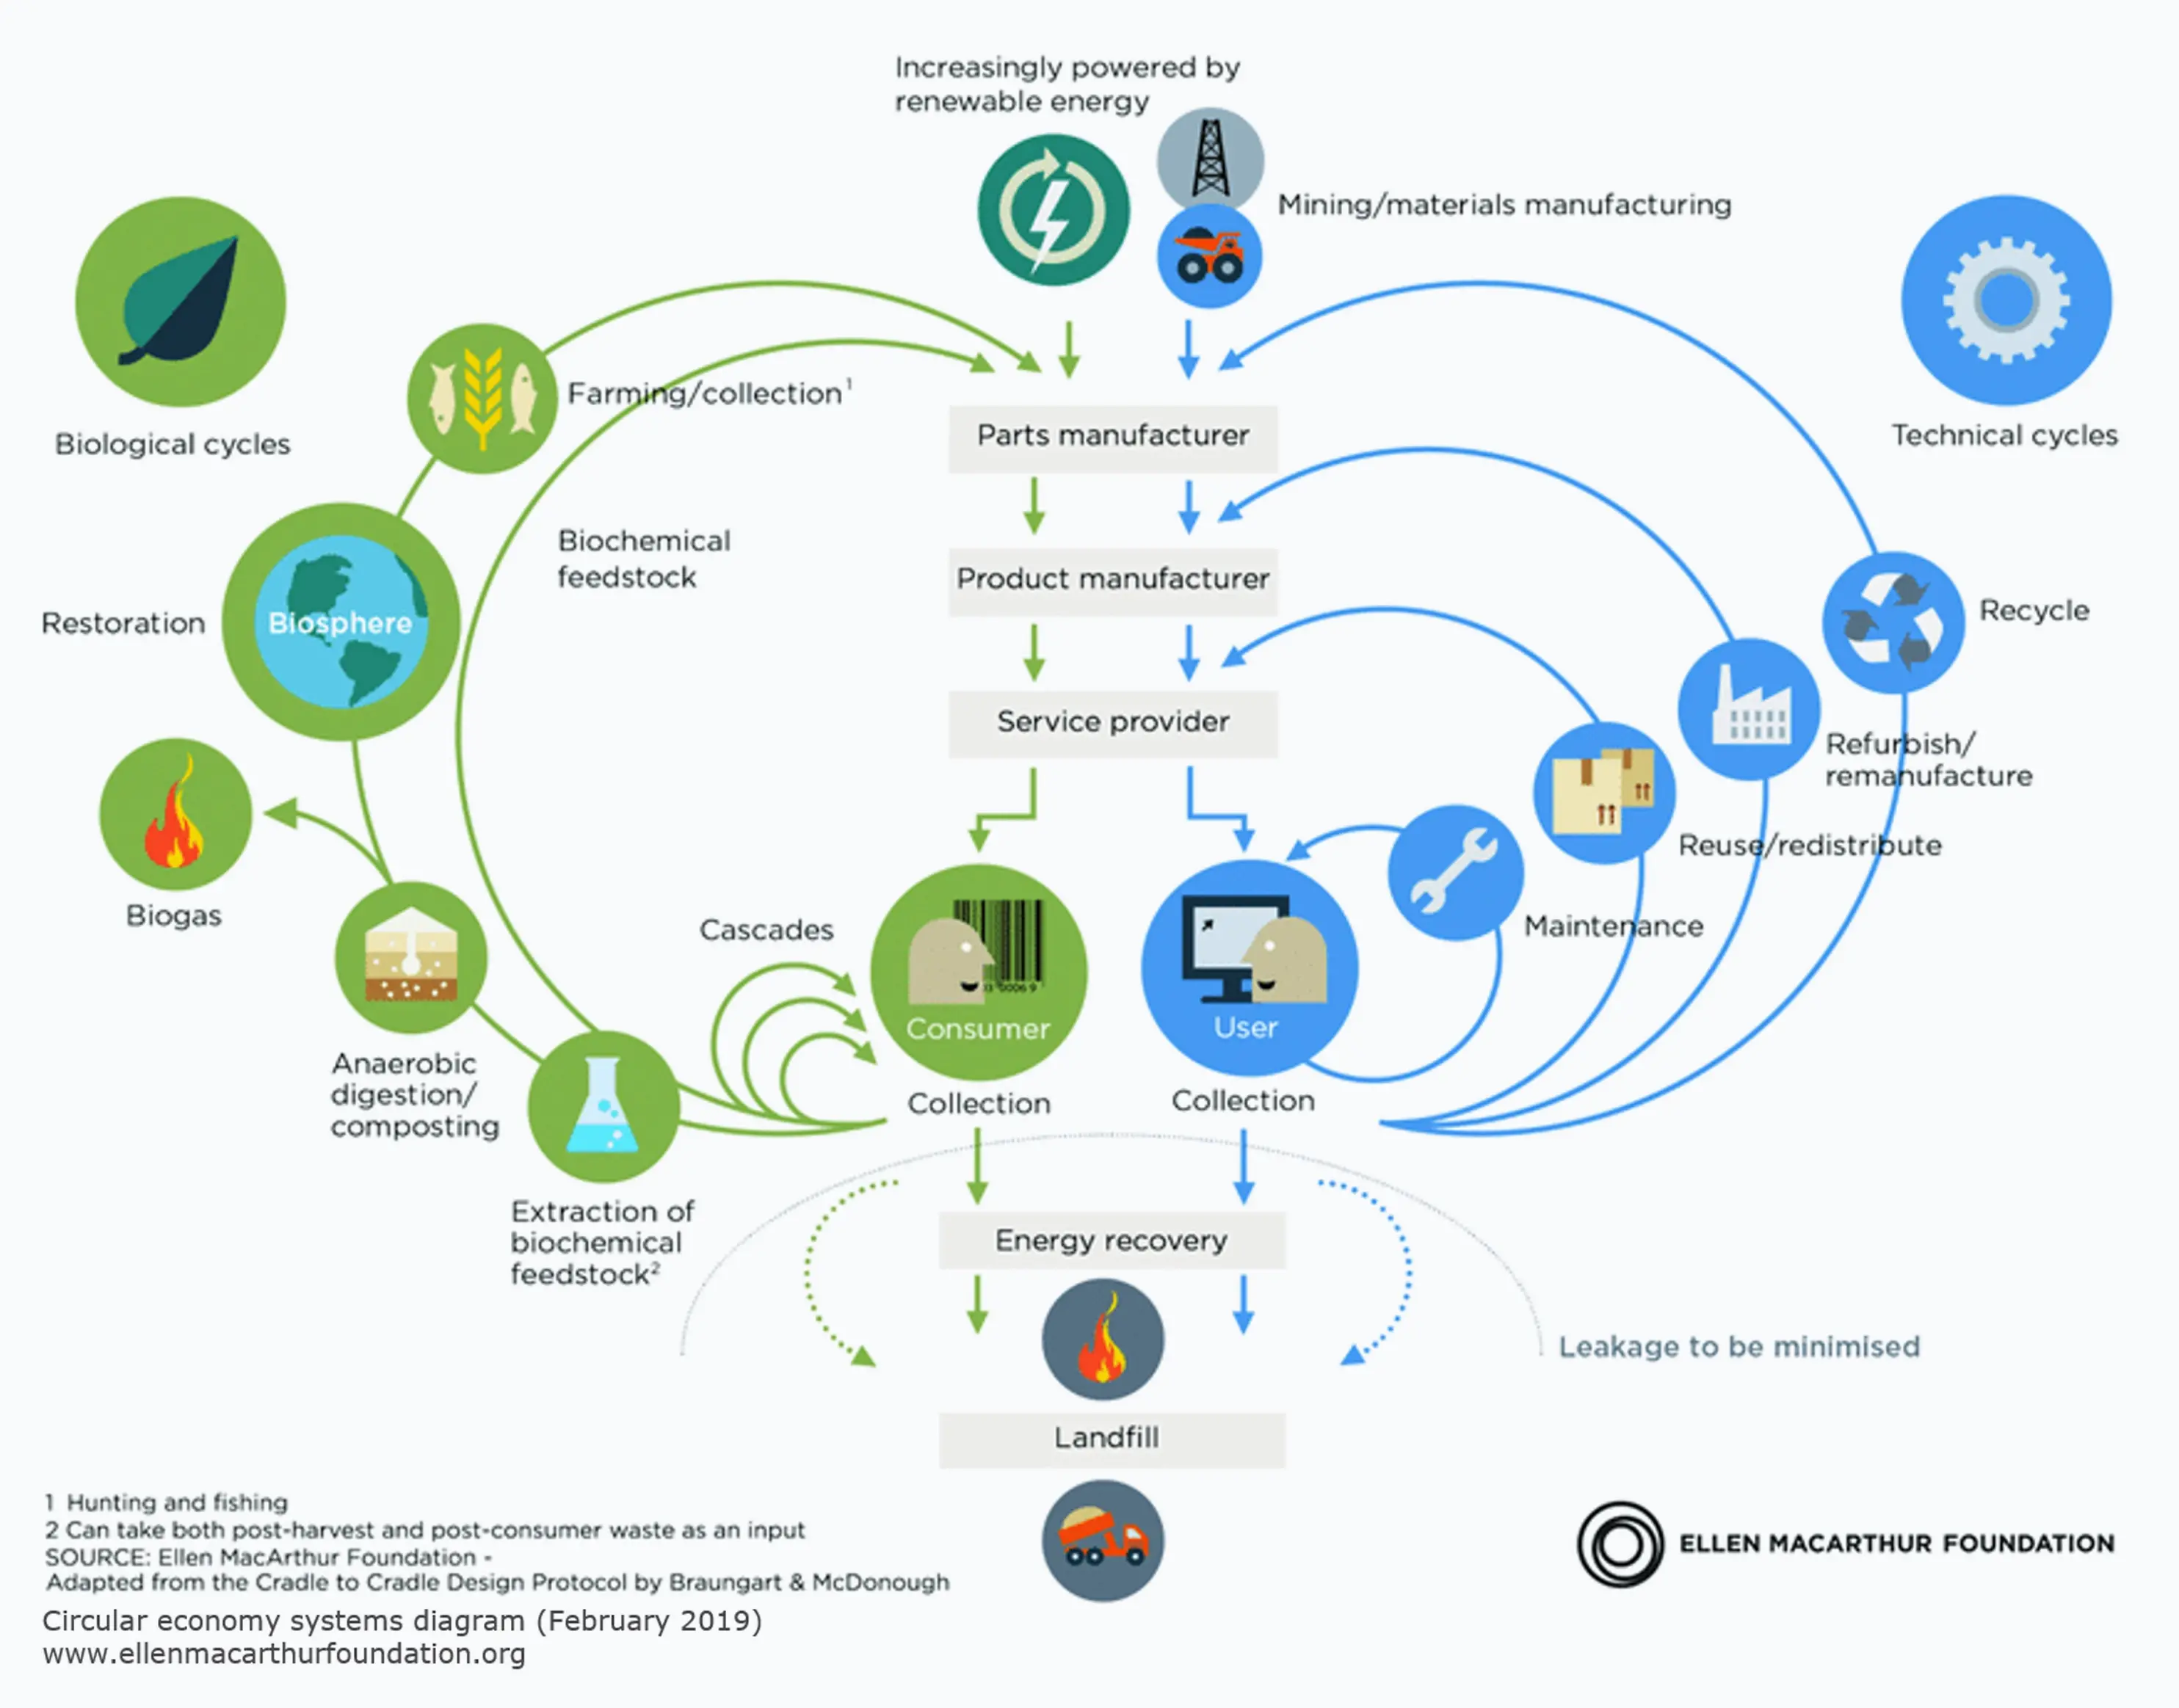 A distinction is often made between the biological circular economy (shown in green) and the technical circular economy (shown in blue). With PÖPPELMANN blue, we implement technical solutions for the circular economy.

Source: Ellen MacArthur Foundation Circular economy system diagram (February 2019) www.ellenmacarthurfoundation.org